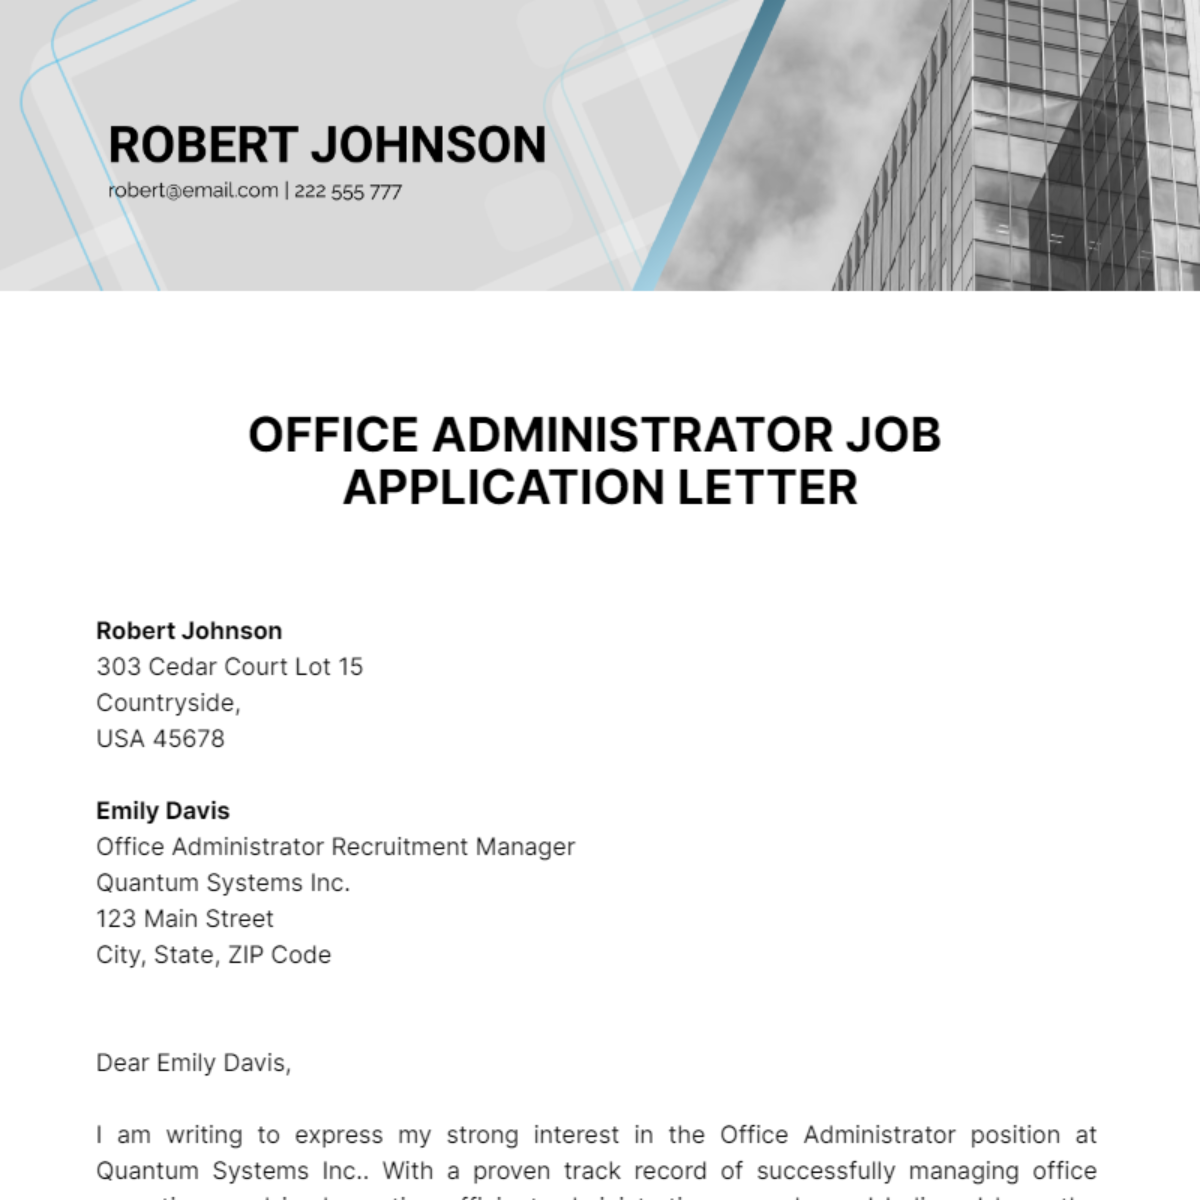 Office Administrator Job Application Letter  Template